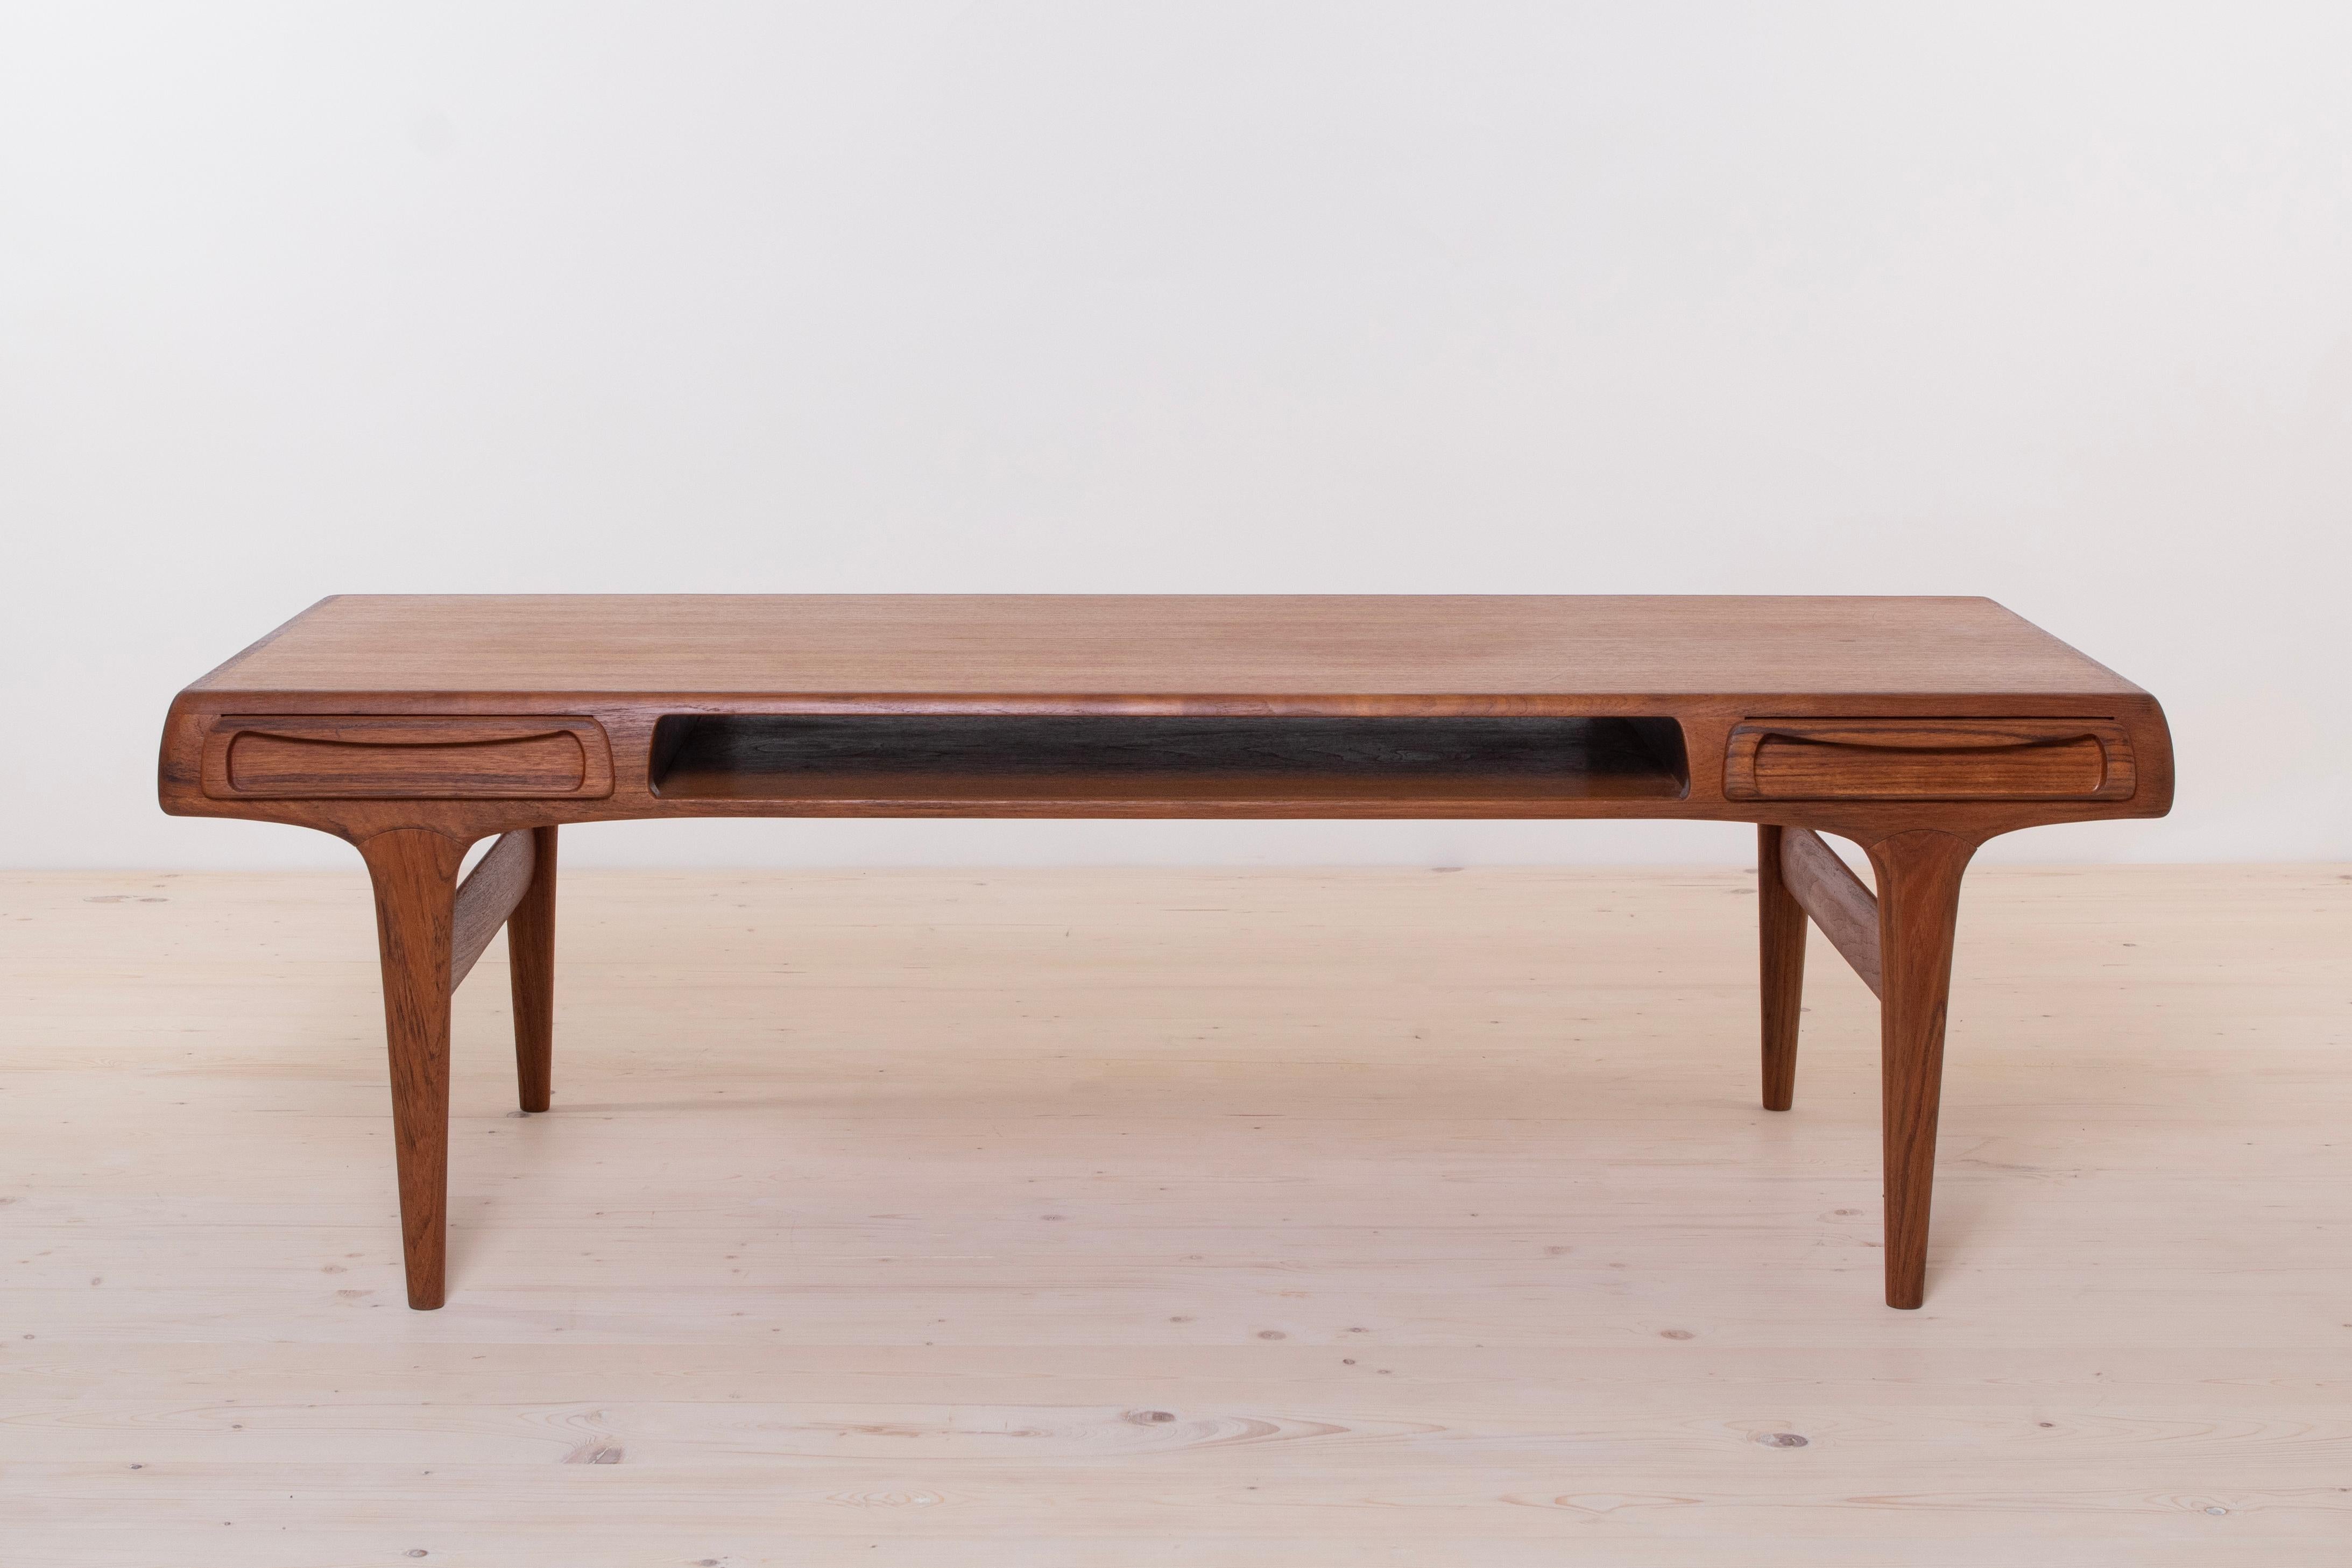 Introducing the epitome of elegance and craftsmanship – the Johannes Andresen Teak Coffee Table designed and made in 1960s. Elevate your living space with this timeless piece that seamlessly blends Scandinavian design and natural beauty. Crafted